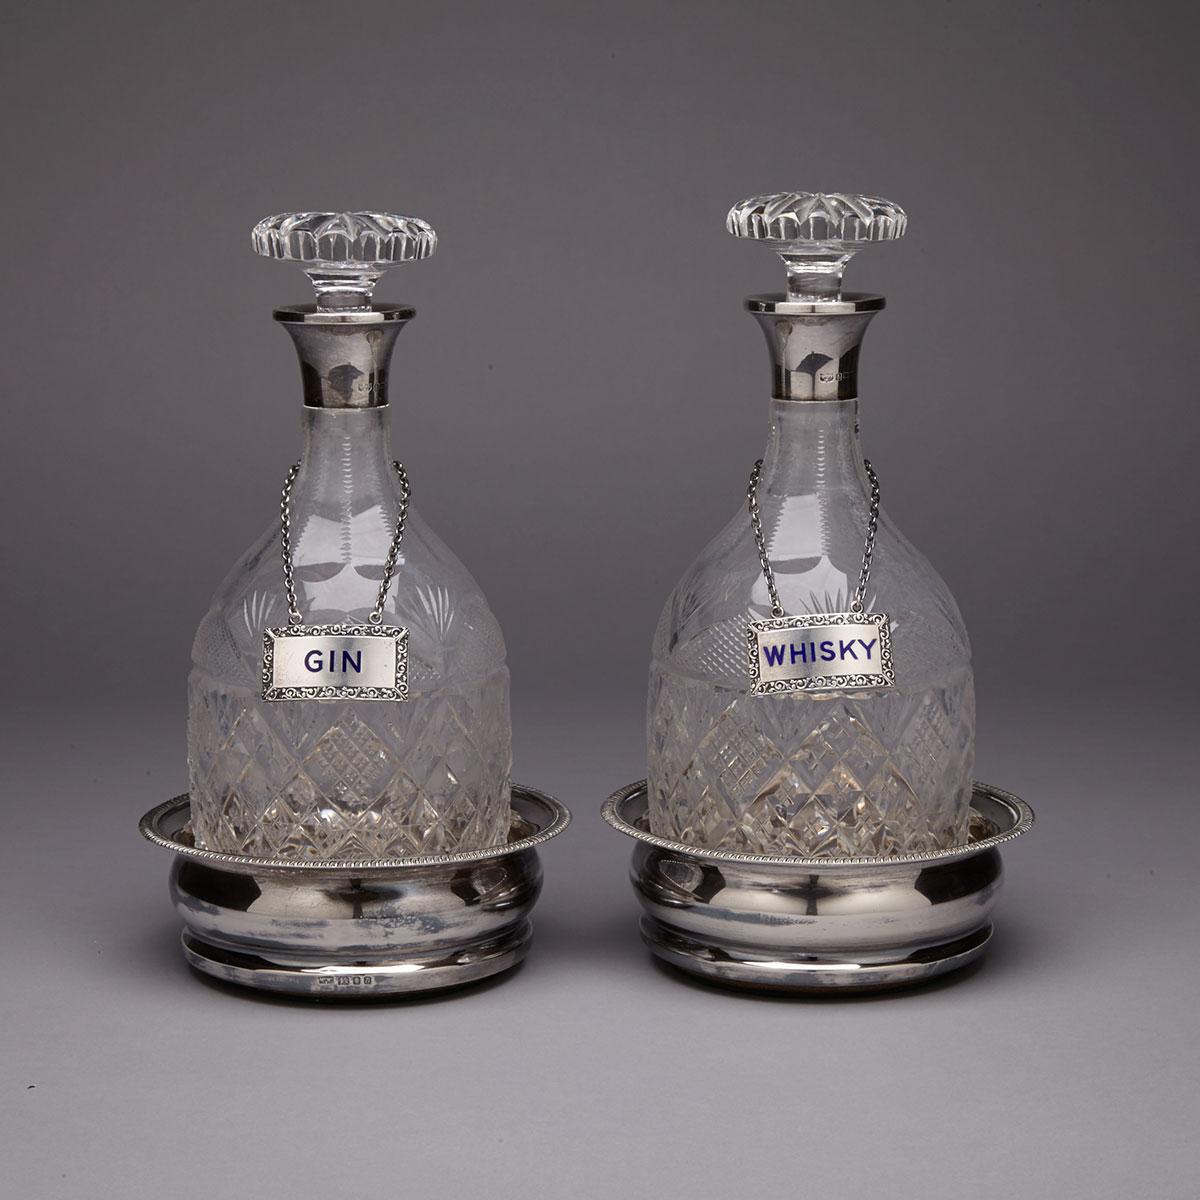 Pair of English Silver Mounted Cut Glass Spirit Decanters with Labels and Coasters, Mappin & Webb, Birmingham and London, 1968